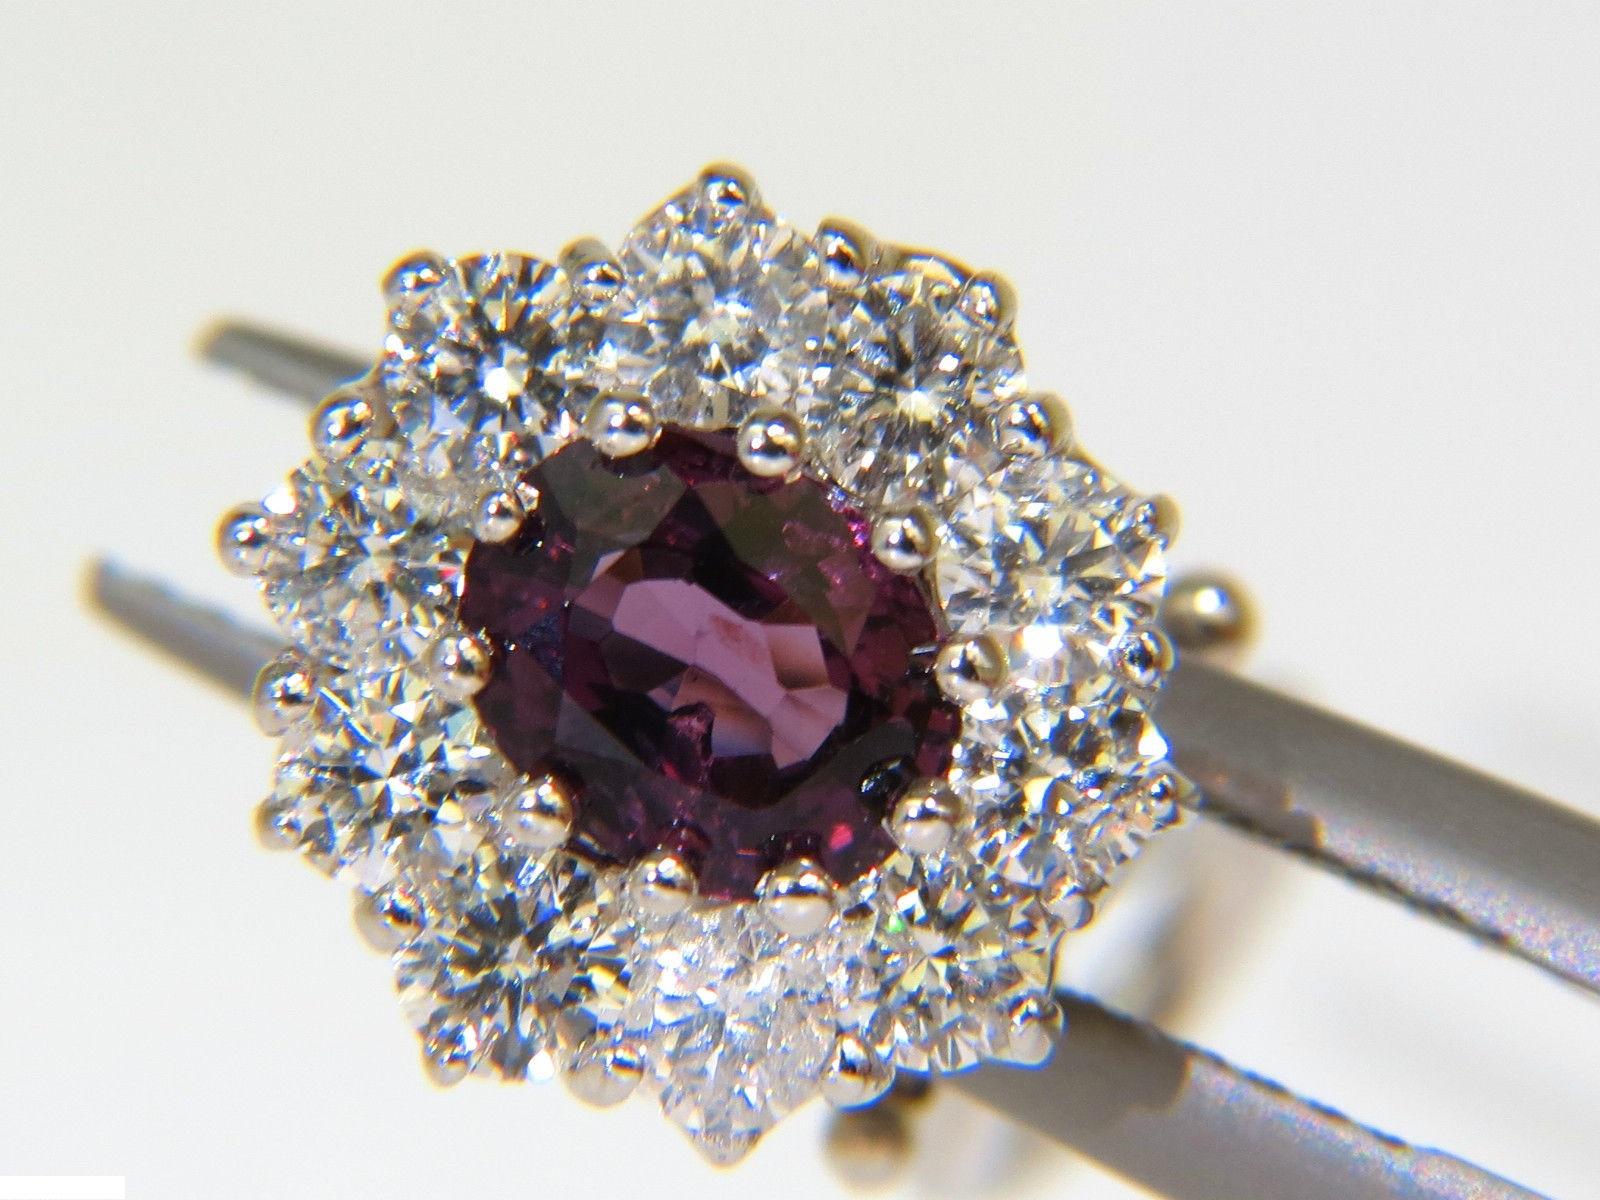 14 Karat 3.36 Carat Natural Purple Spinel Diamond Cluster Earrings and Omega For Sale 4